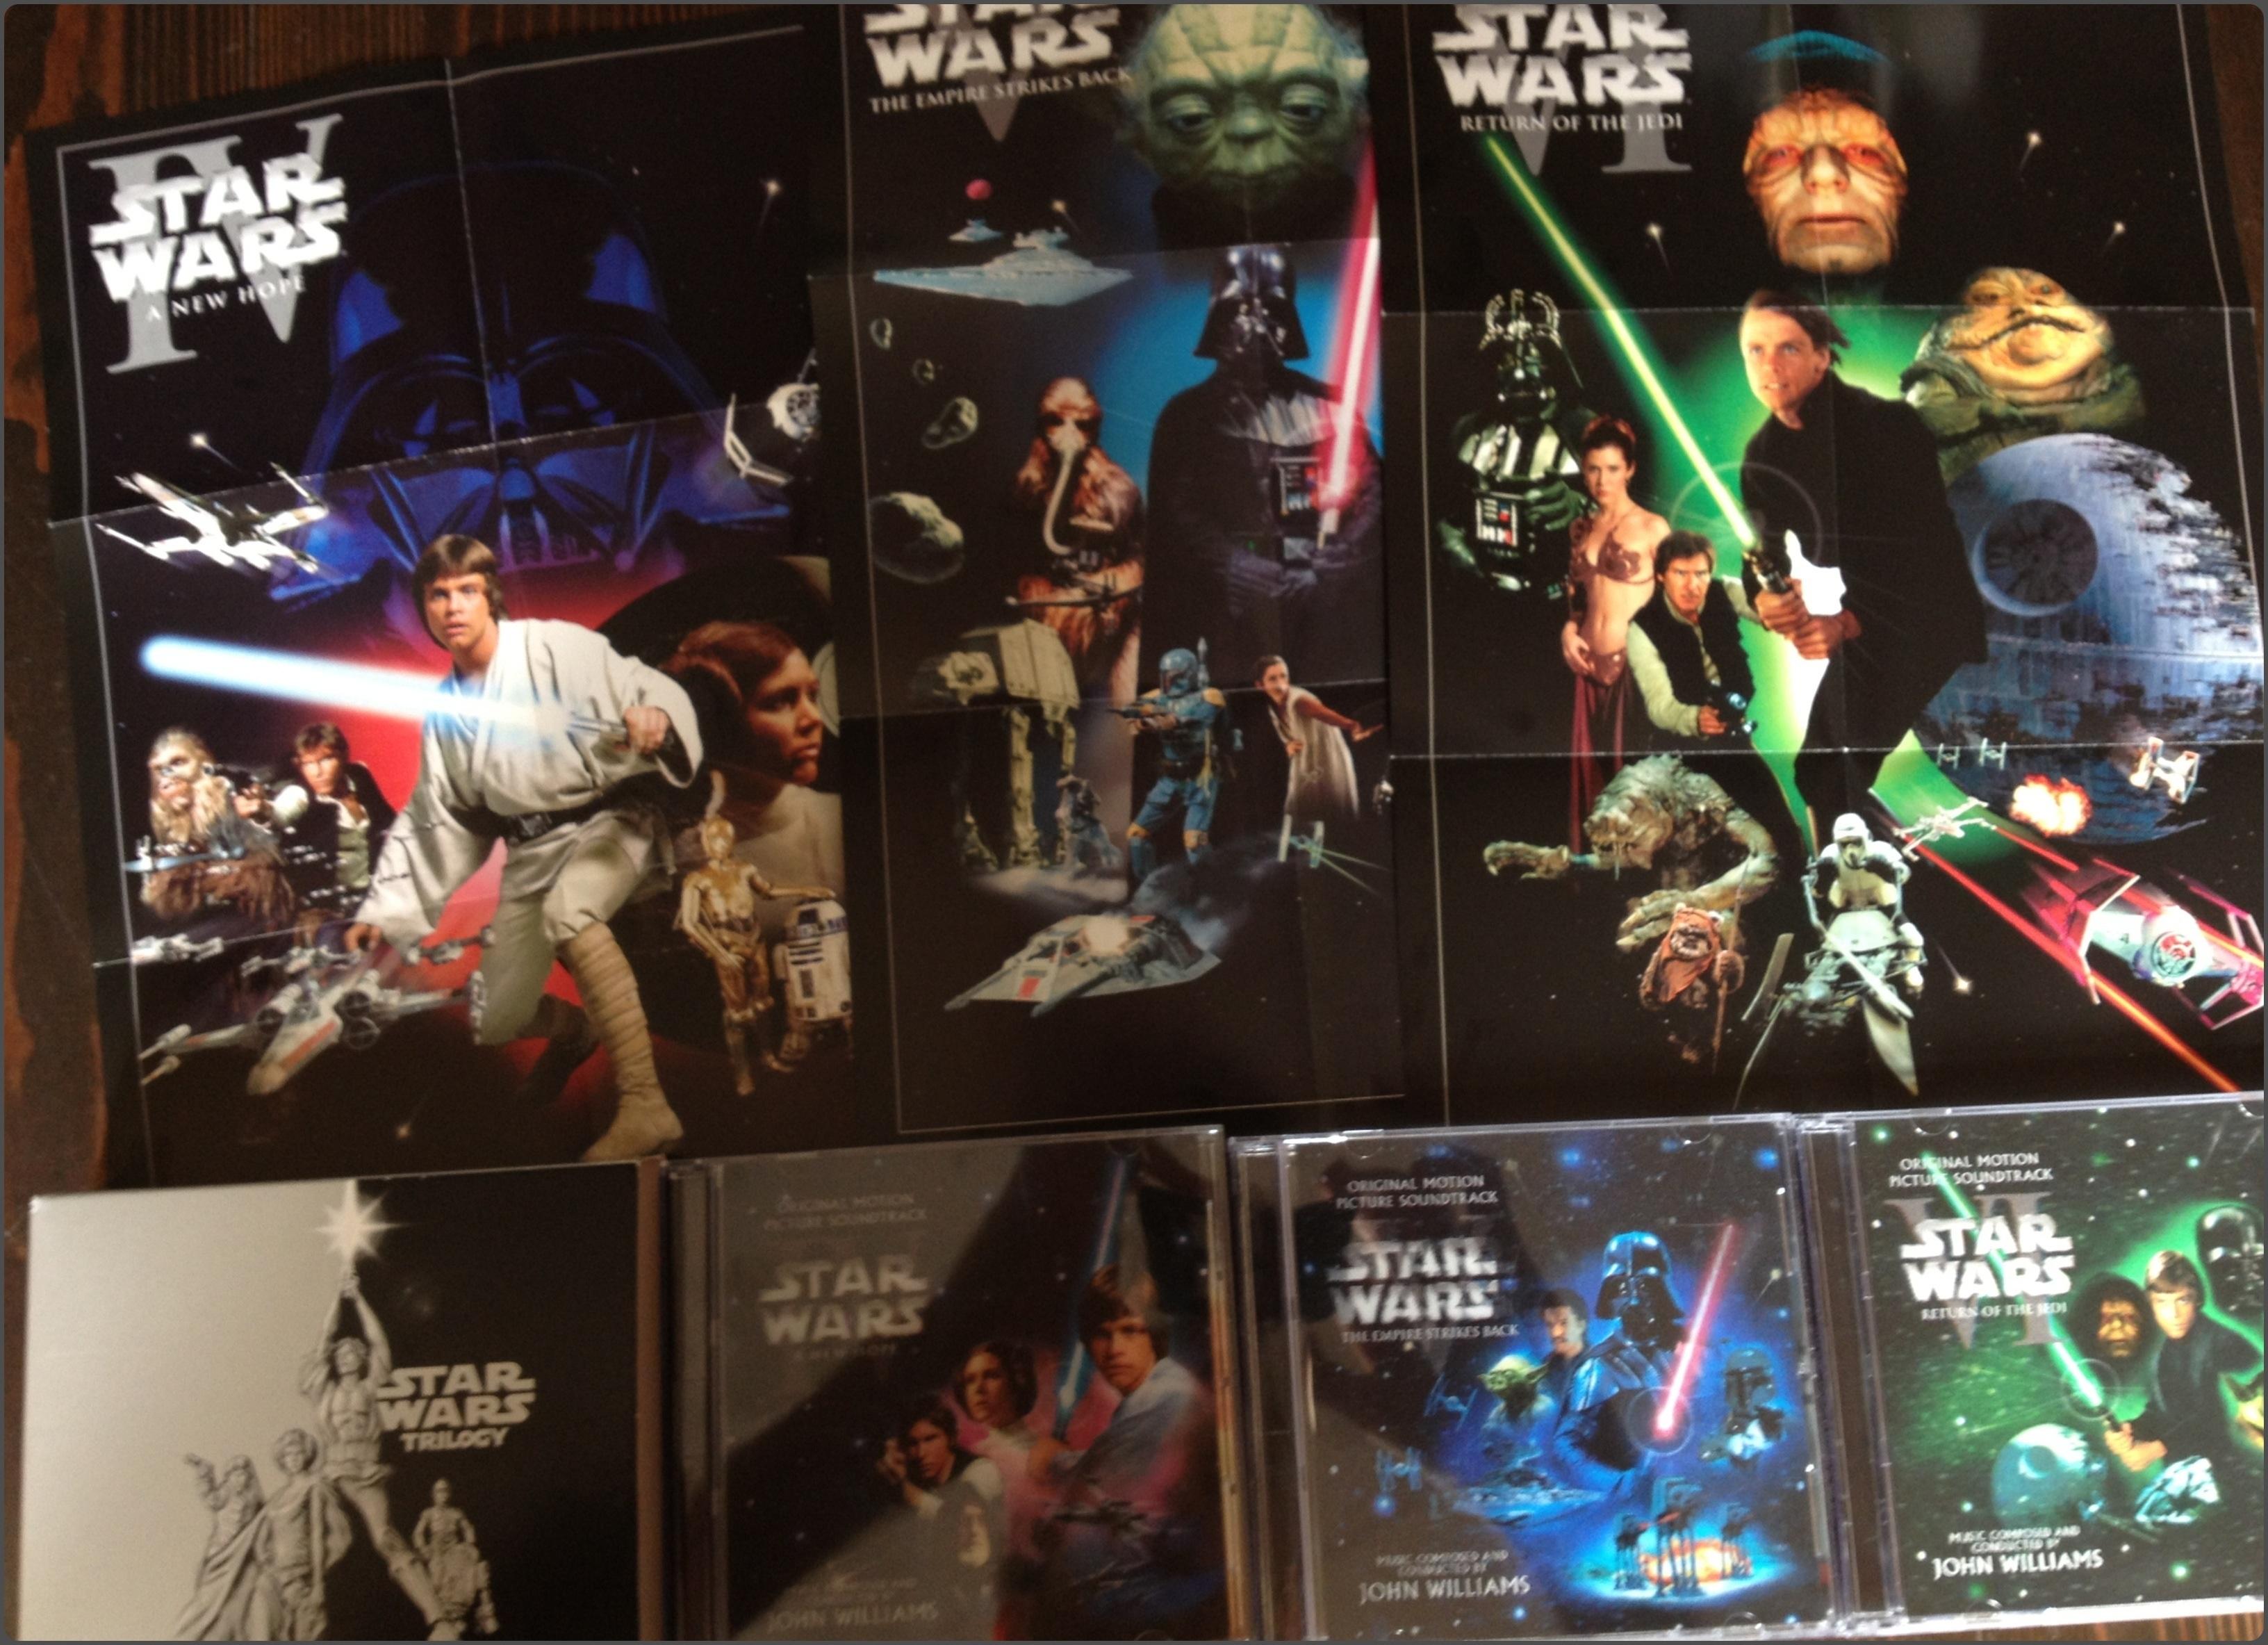 Star Wars, My X-wing table topgame soundtrack!